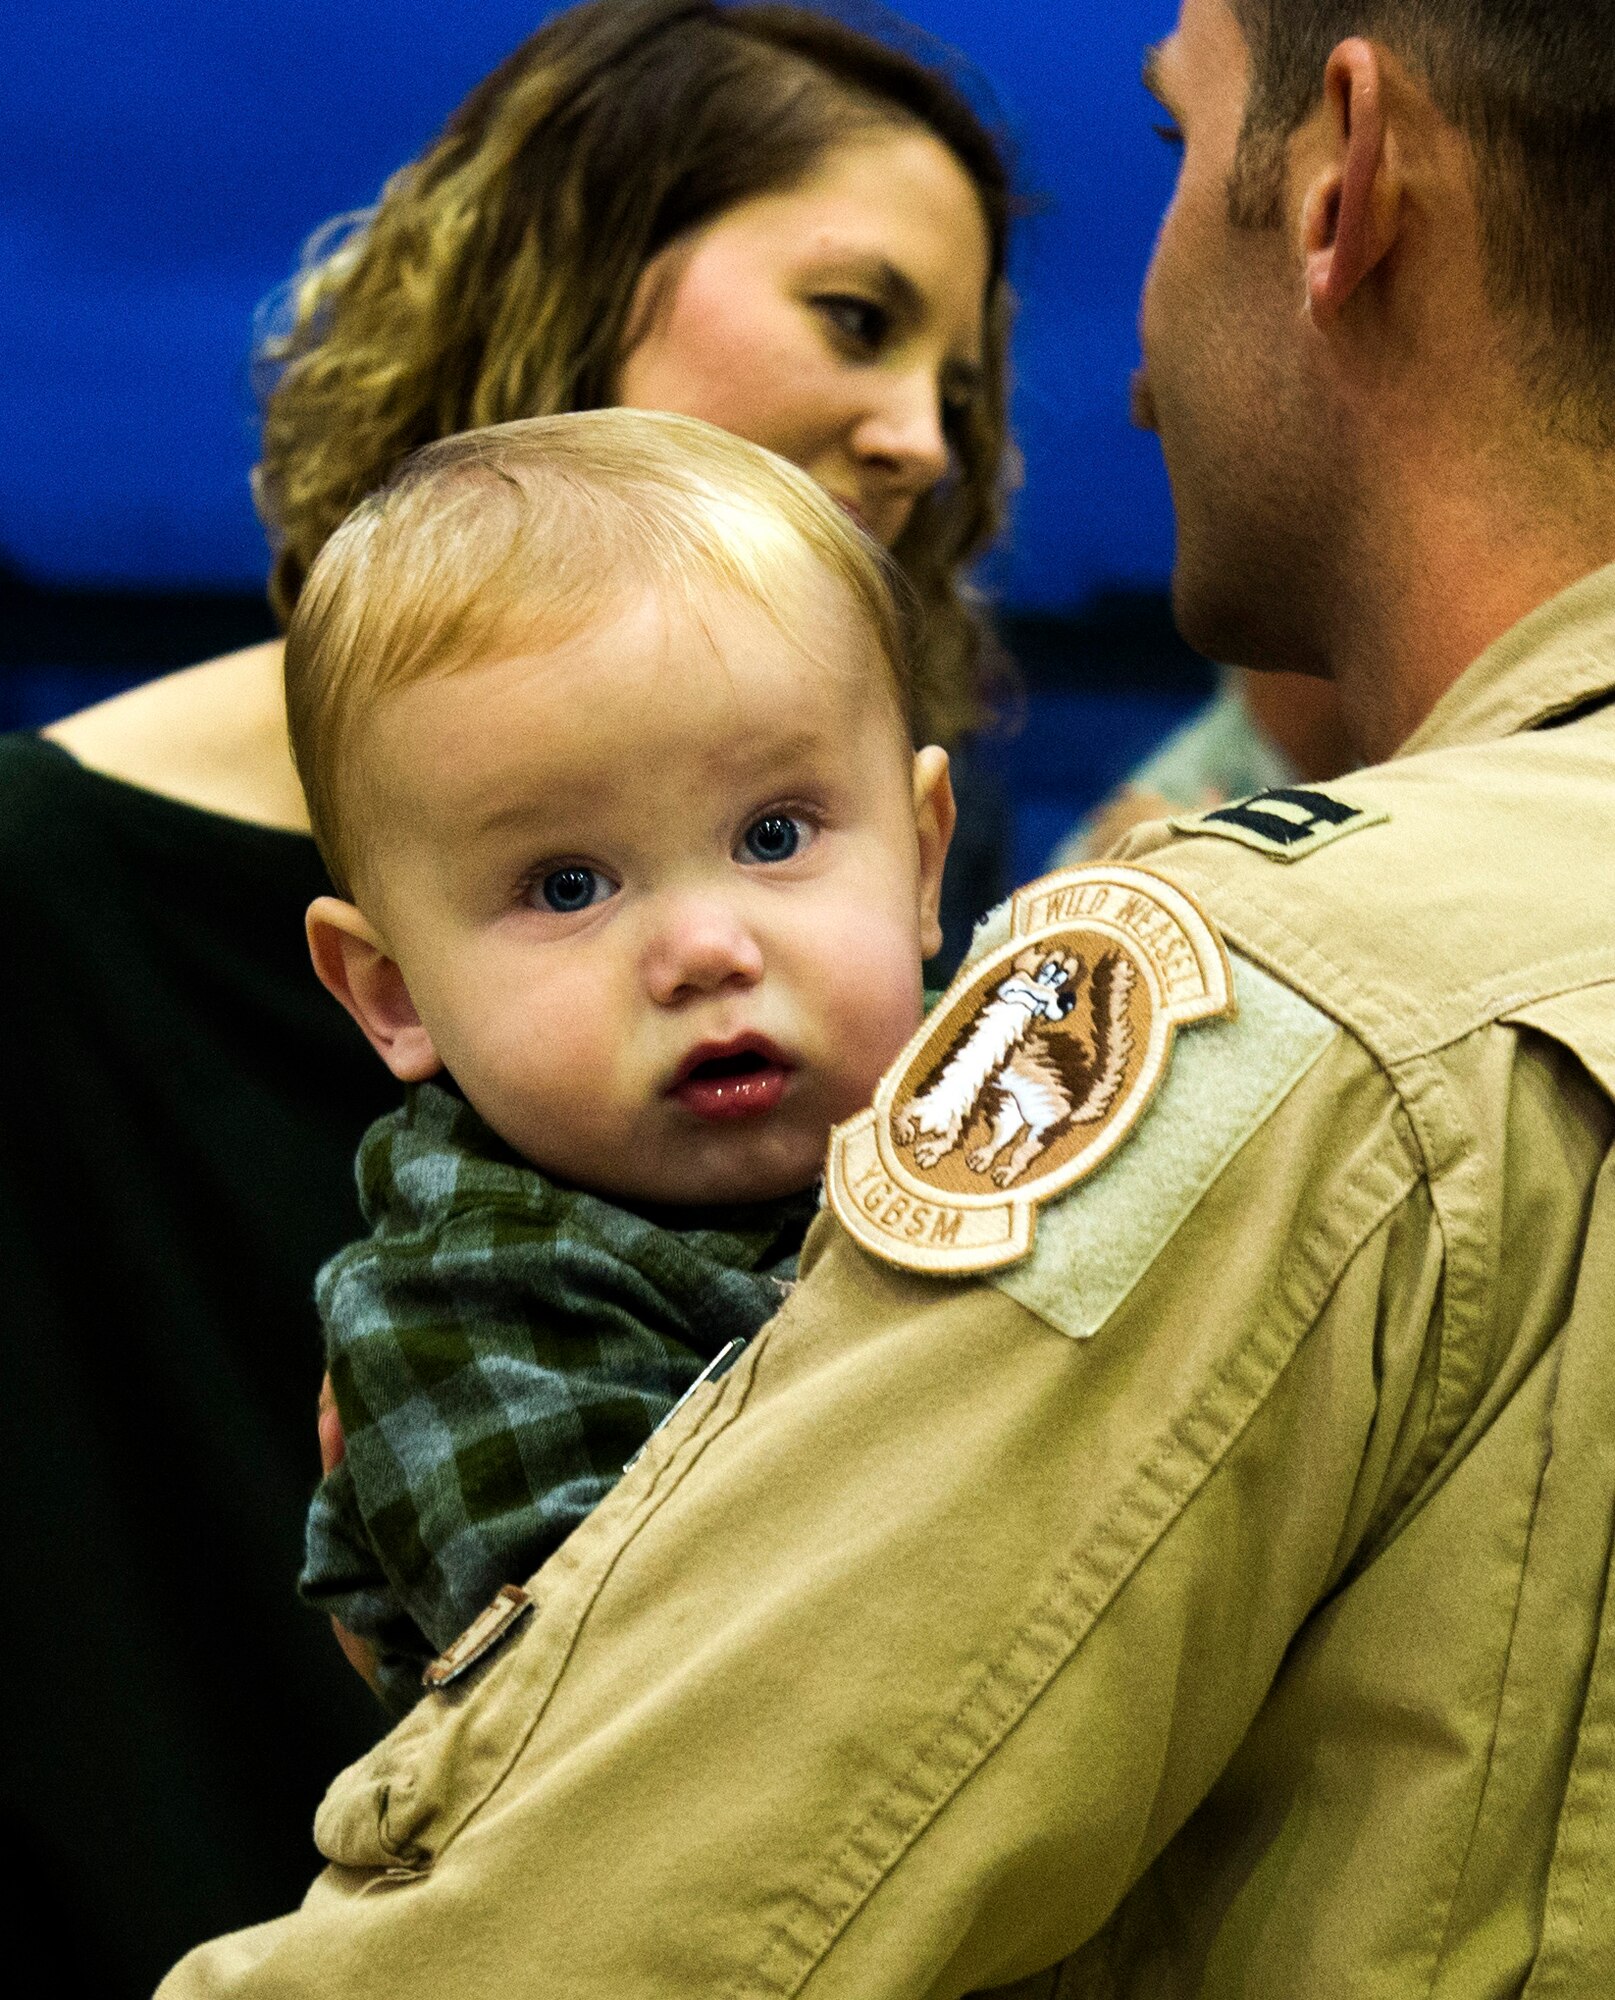 An Airman from the 480th Expeditionary Fighter Squadron holds his son after returning to Spangdahlem Air Base, Germany, Oct. 12, 2016. The squadron completed a six-month deployment to Southwest Asia to support Operation Inherent Resolve, which aims to defeat enemy forces in the Combined Joint Force Area. (U.S. Air Force photo/Airman 1st Class Preston Cherry)